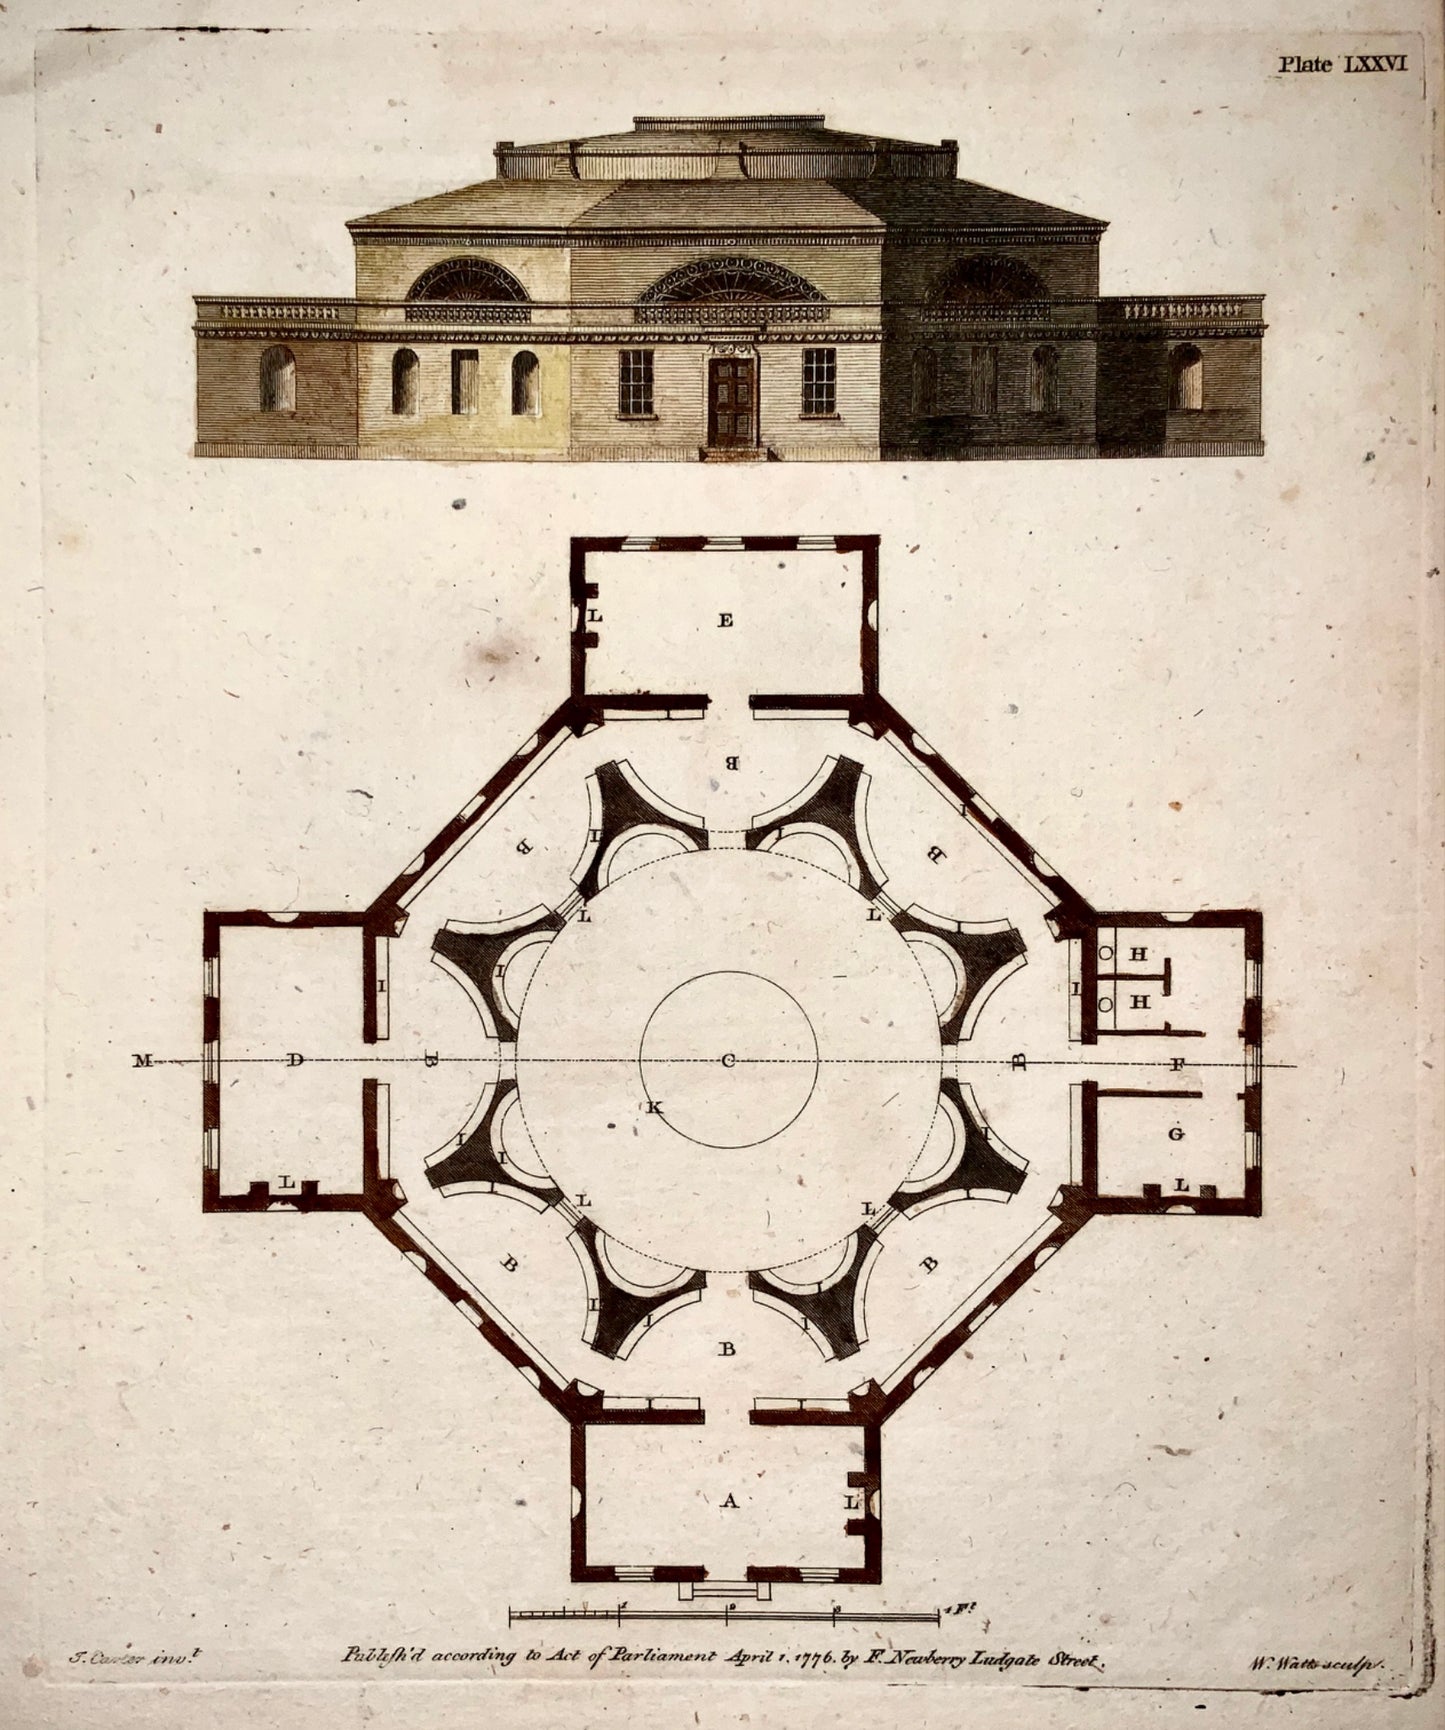 1776 W. Watts after J Carter - Temple Architecture with plan - Hand colour